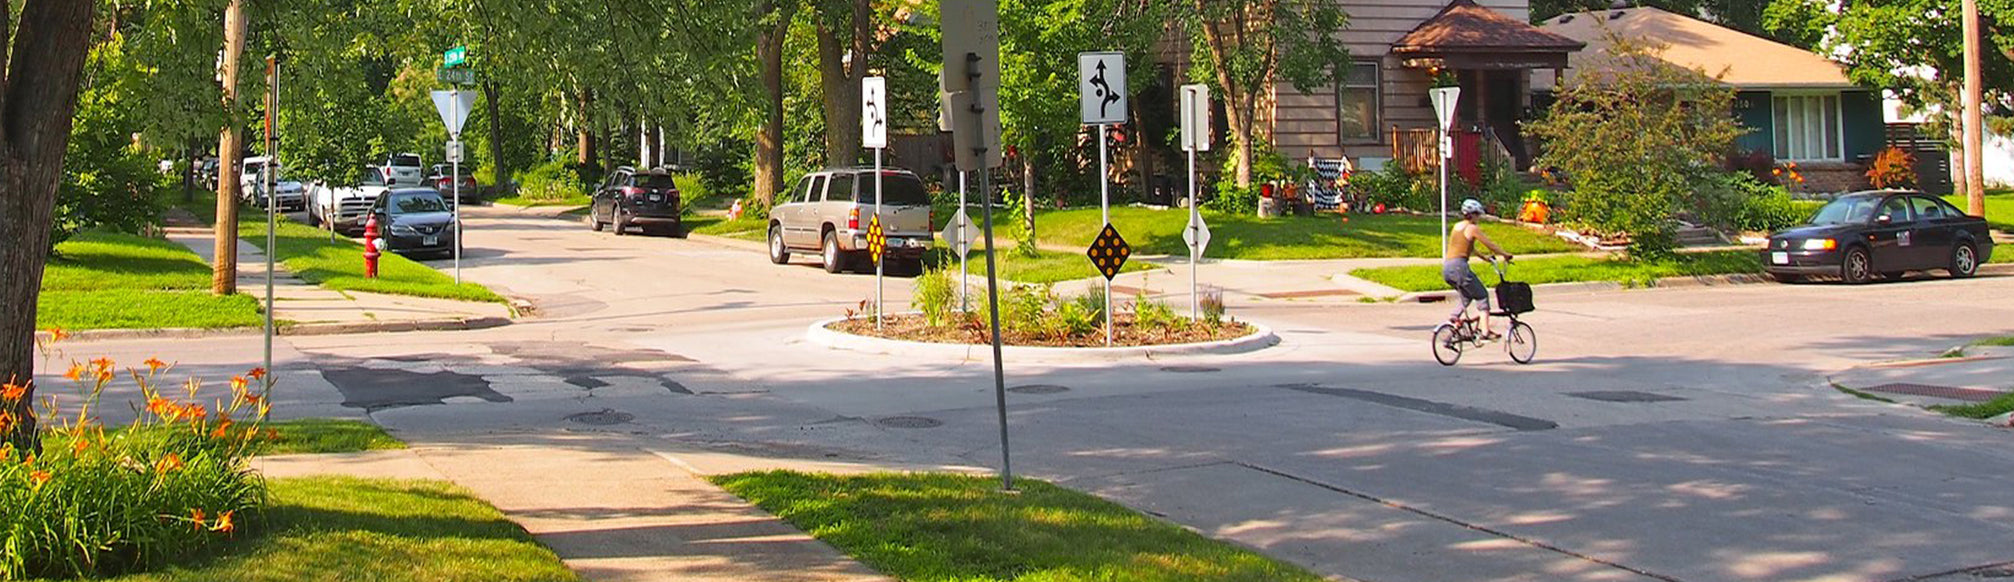 Mini roundabout in a residential neighborhood with a bicyclist travelling through the intersection